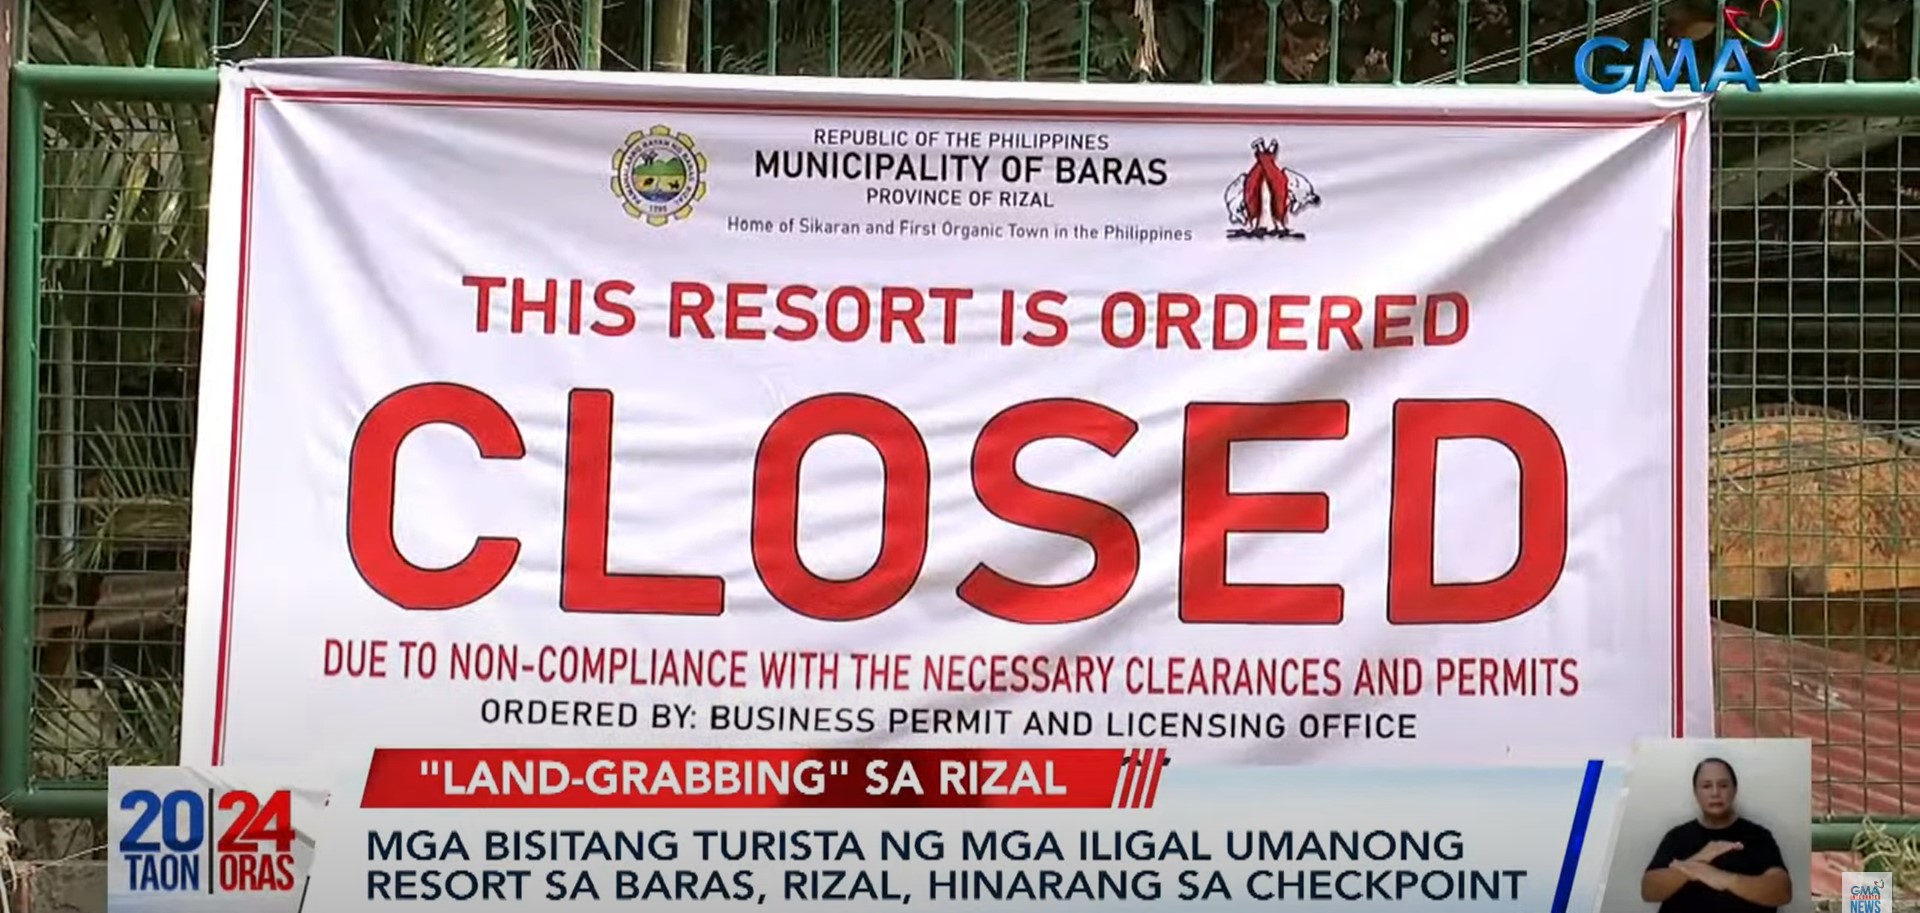 Resorts in protected areas closed by Baras LGU